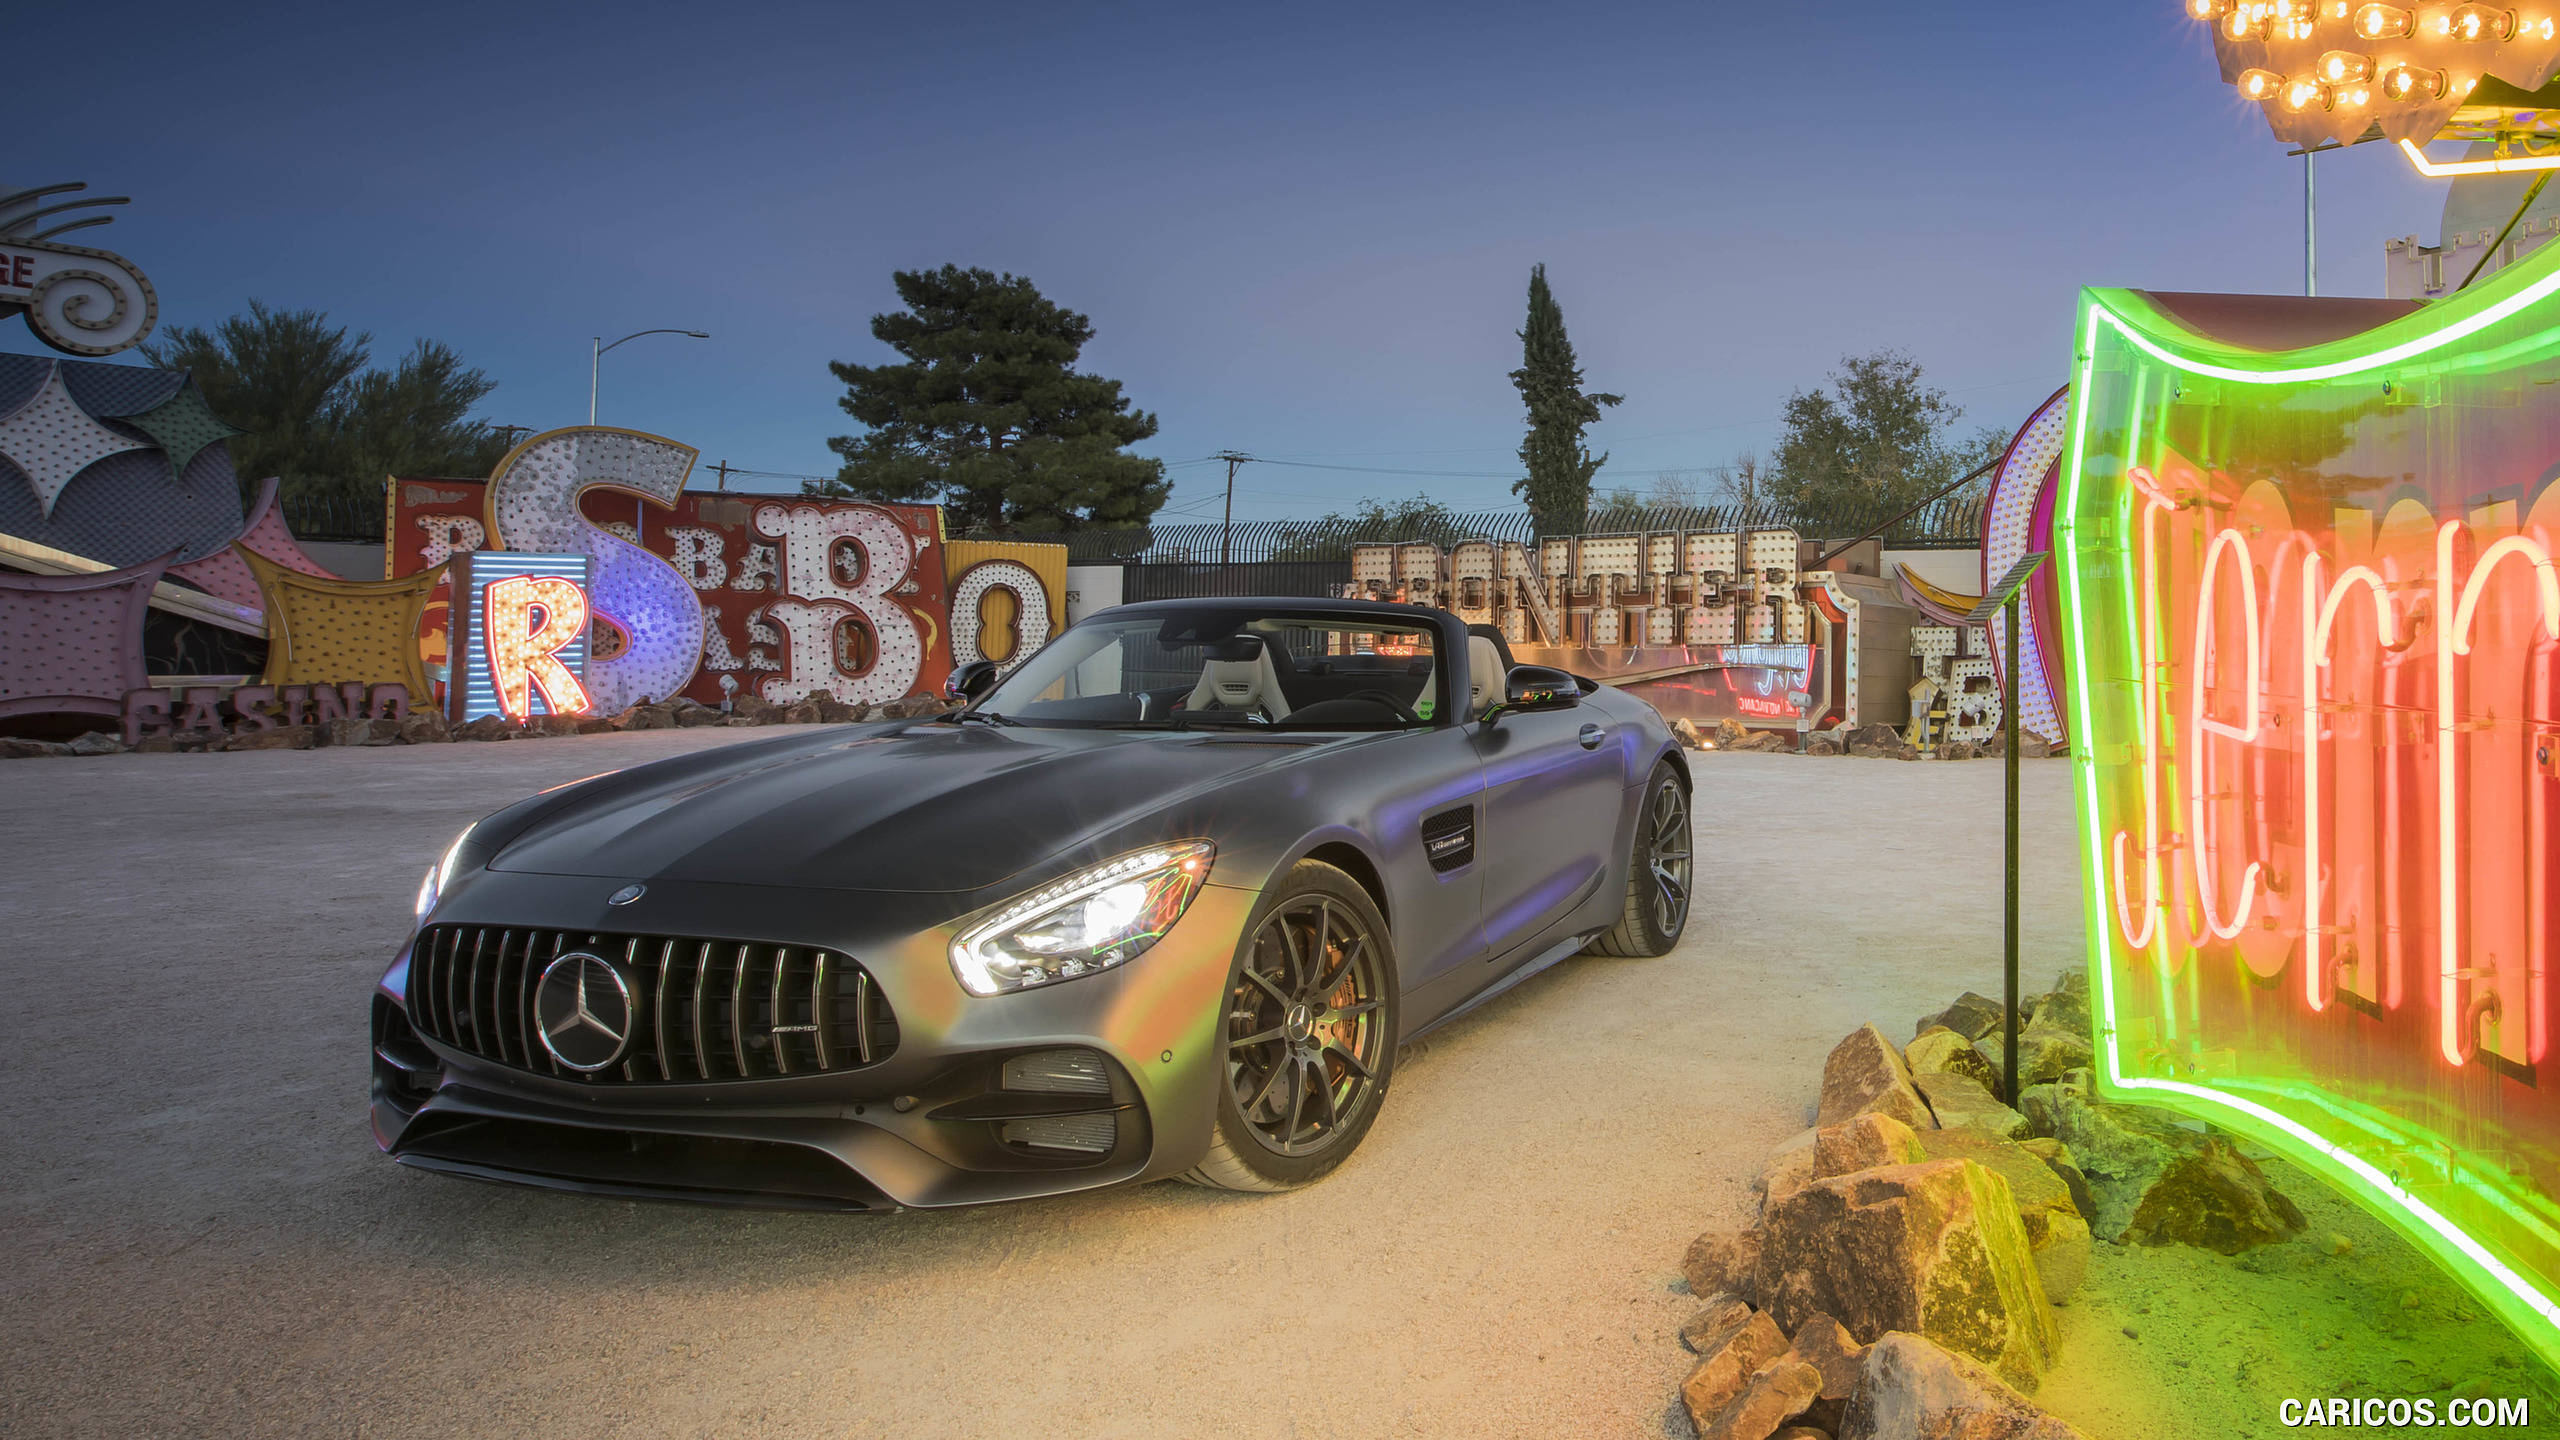 2018 Mercedes-AMG GT C Roadster - Front Three-Quarter, #67 of 350